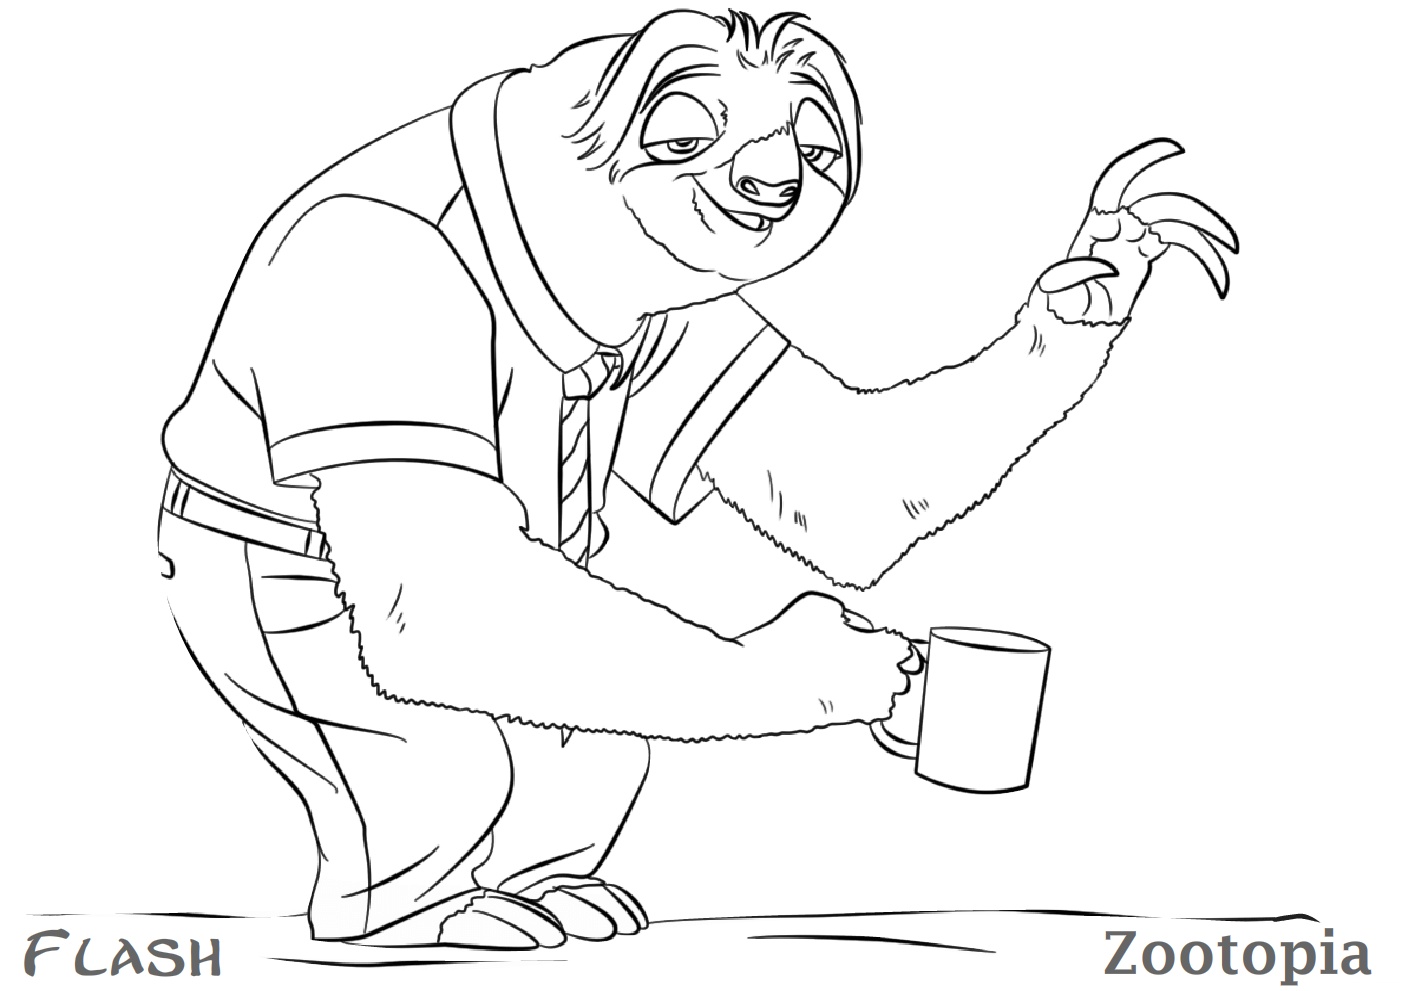 Flash Sloth Zootopia Coloring Pages